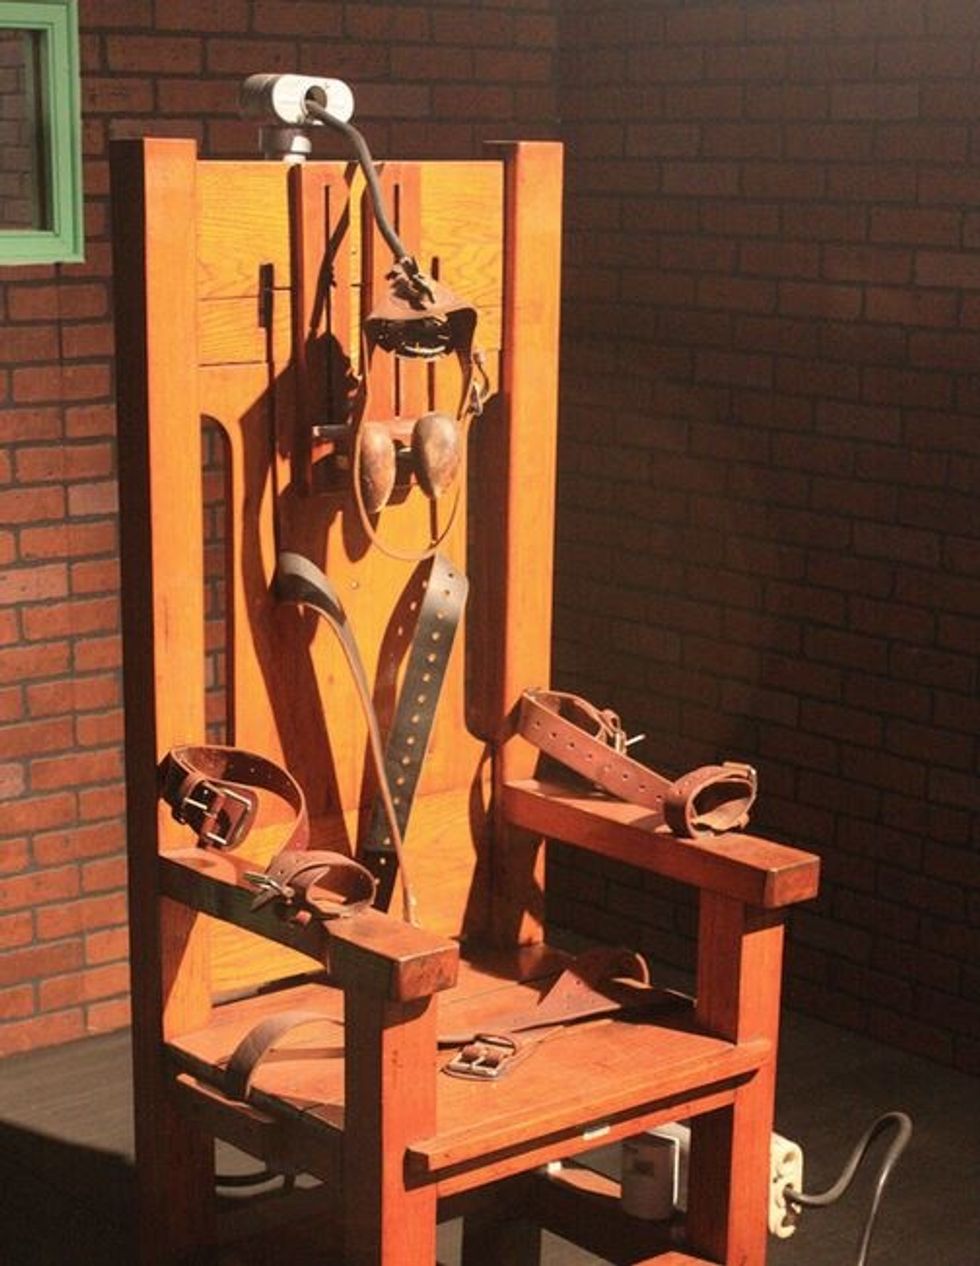 Tennessee OKs Electric Chair When Lethal Injection Drugs Unavailable